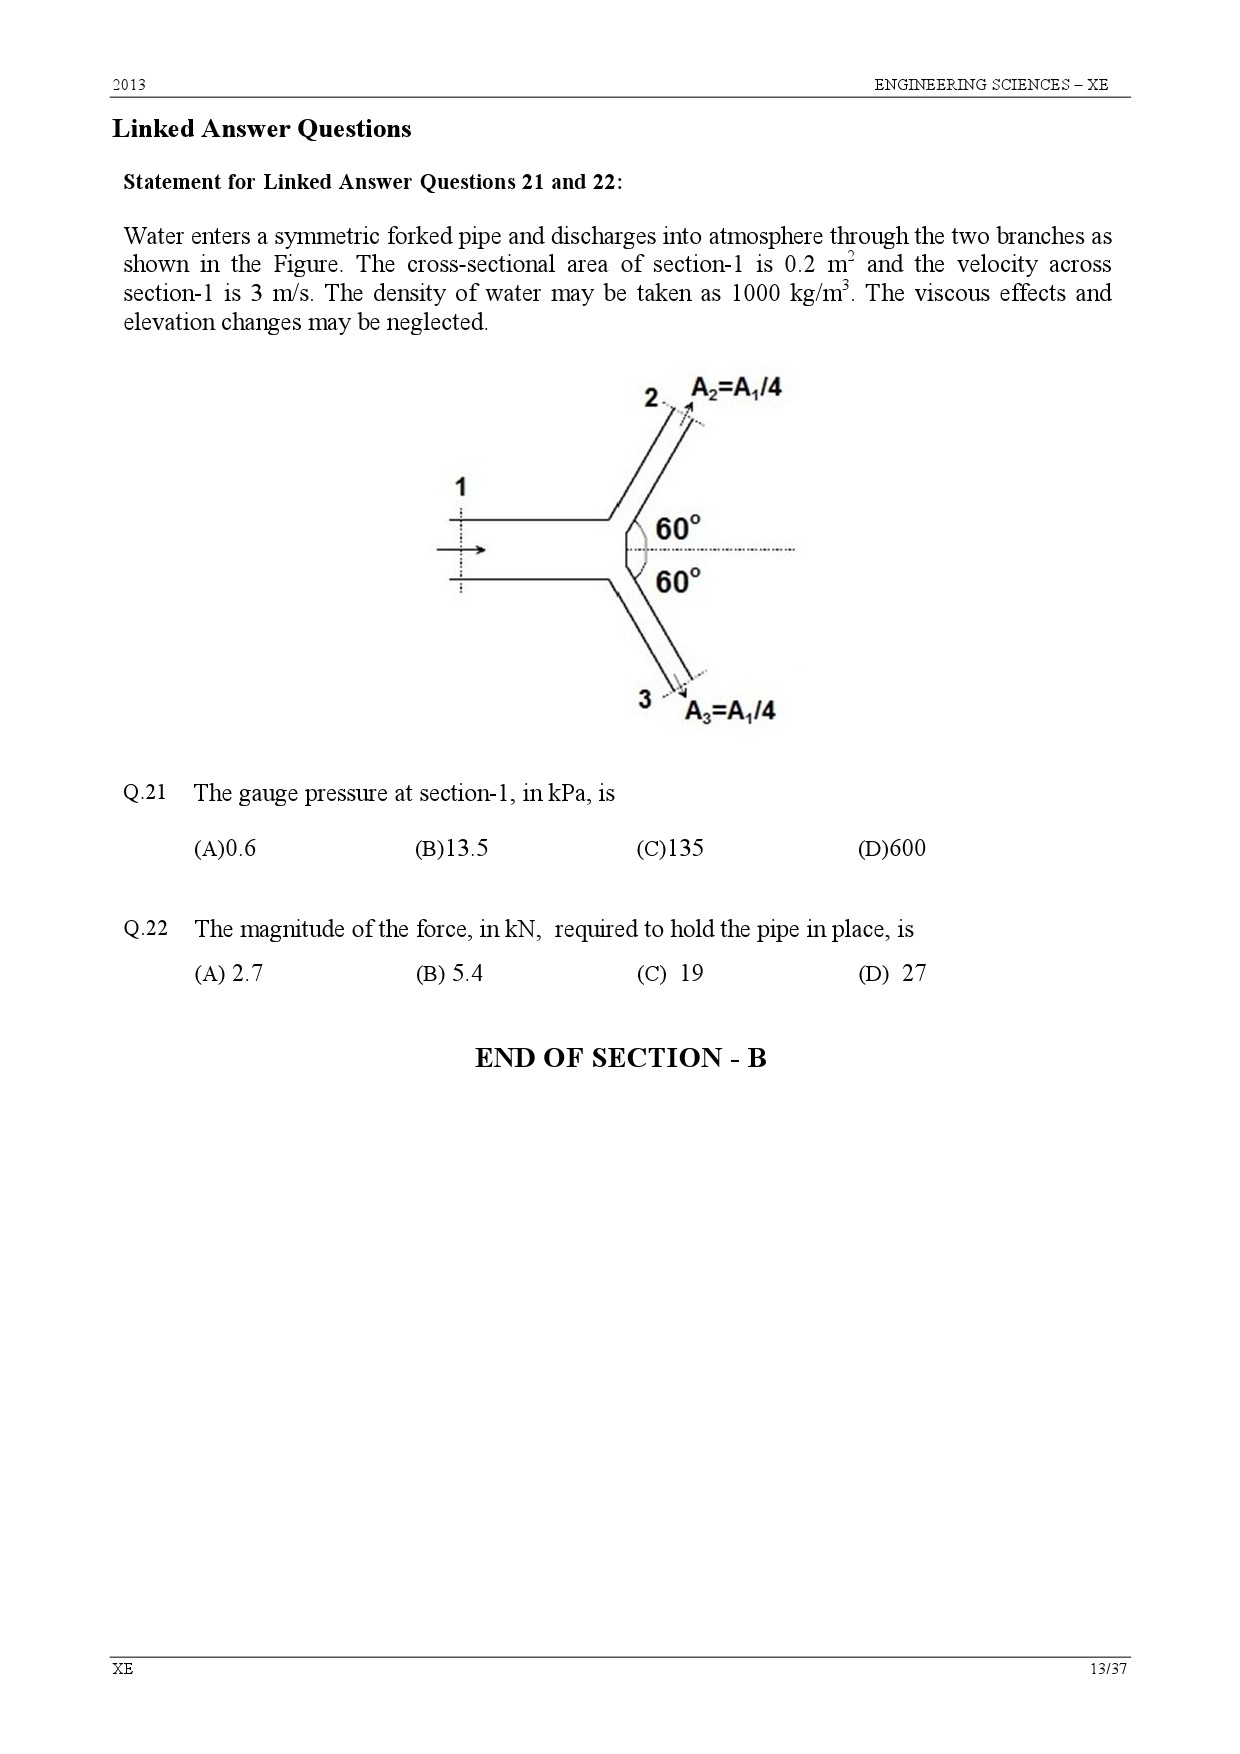 GATE Exam Question Paper 2013 Engineering Sciences 13